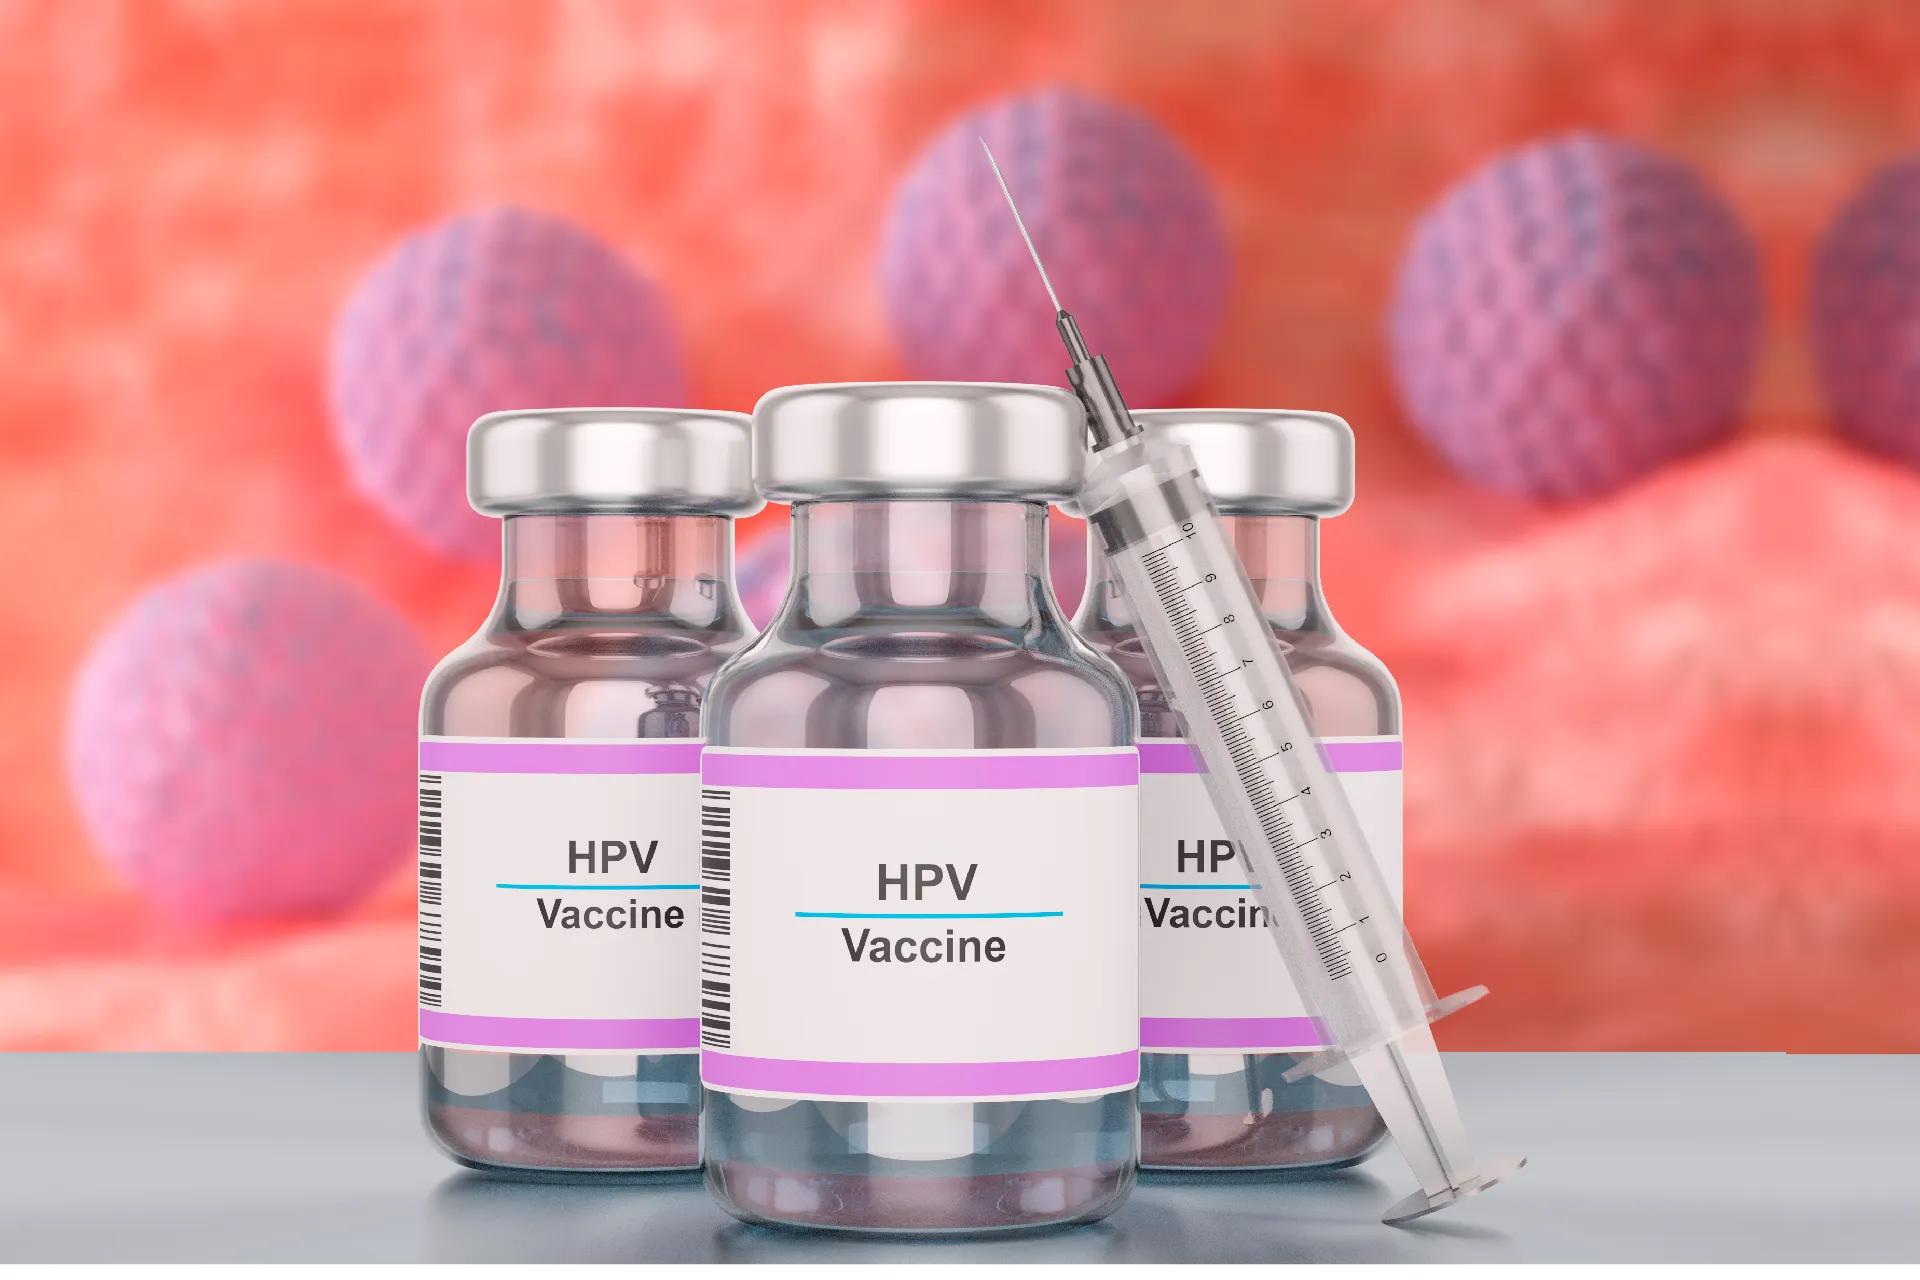 HPV Vaccines: Uses, Doses, Vaccination Drive and Importance